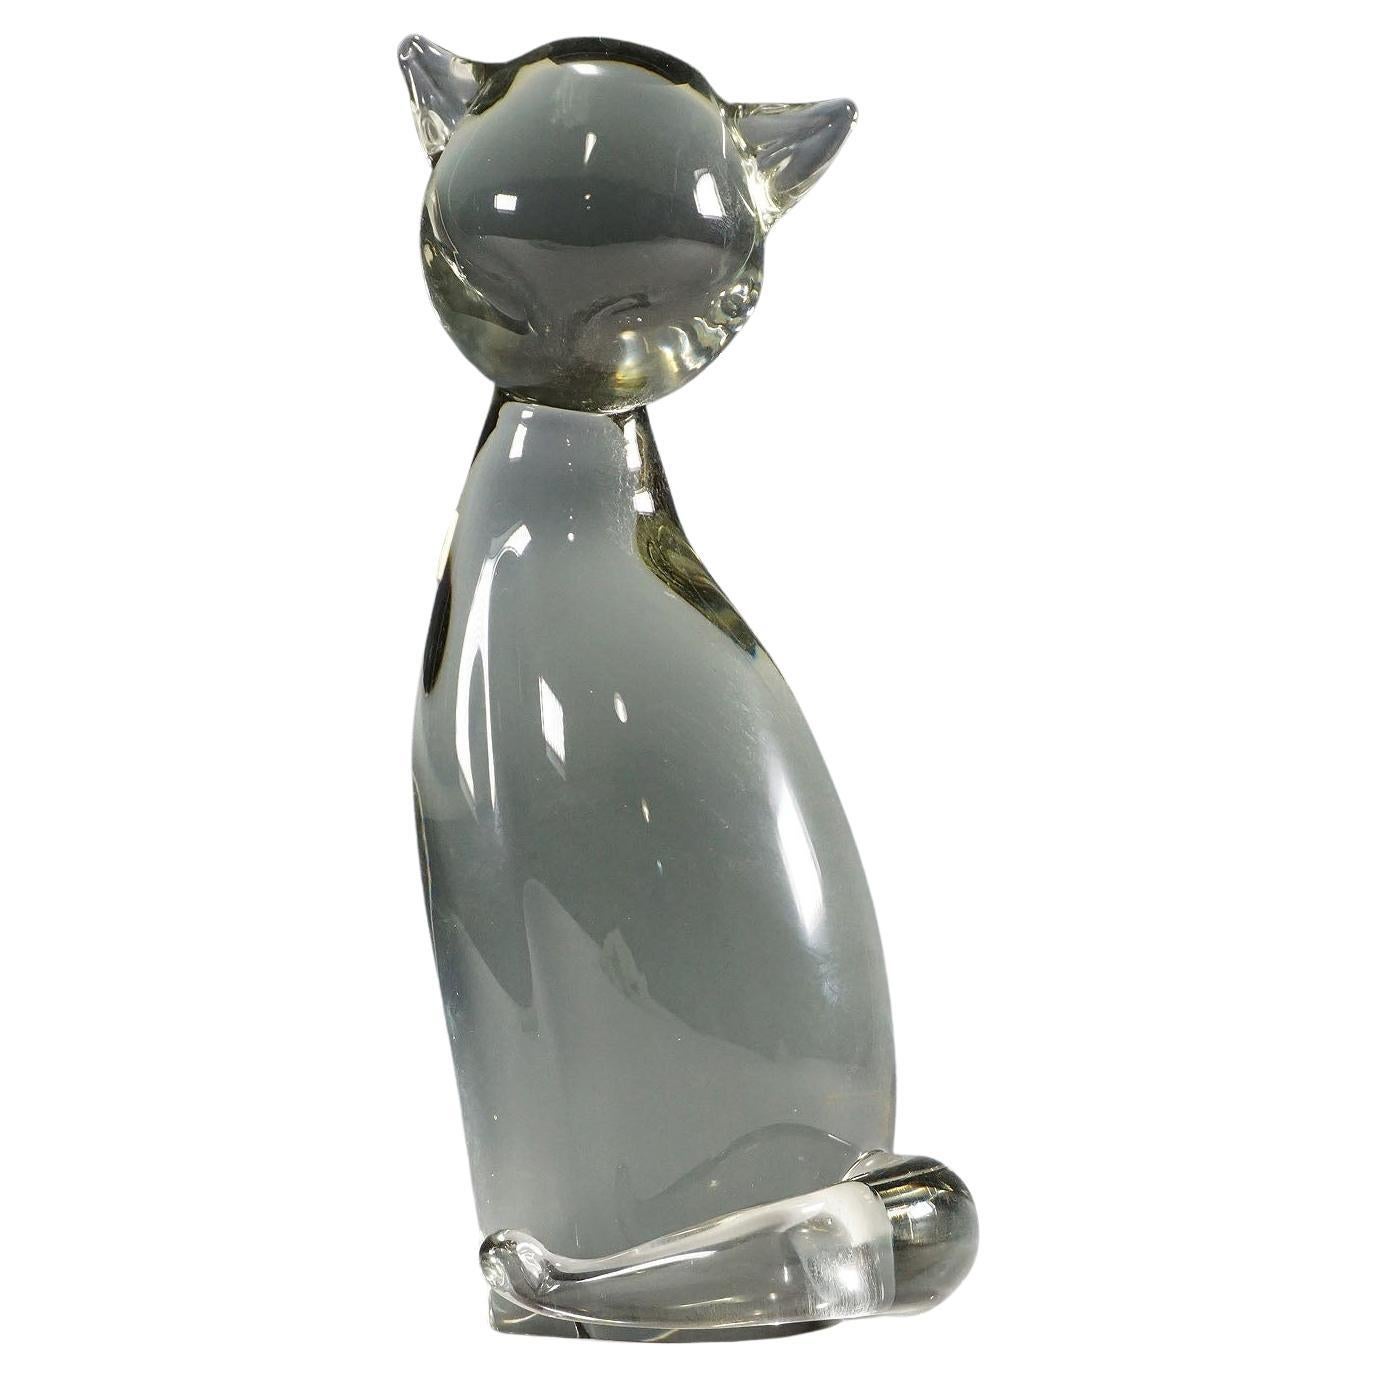 Sculpture of a Stylized Cat Designed by Livio Seguso, ca. 1970s For Sale